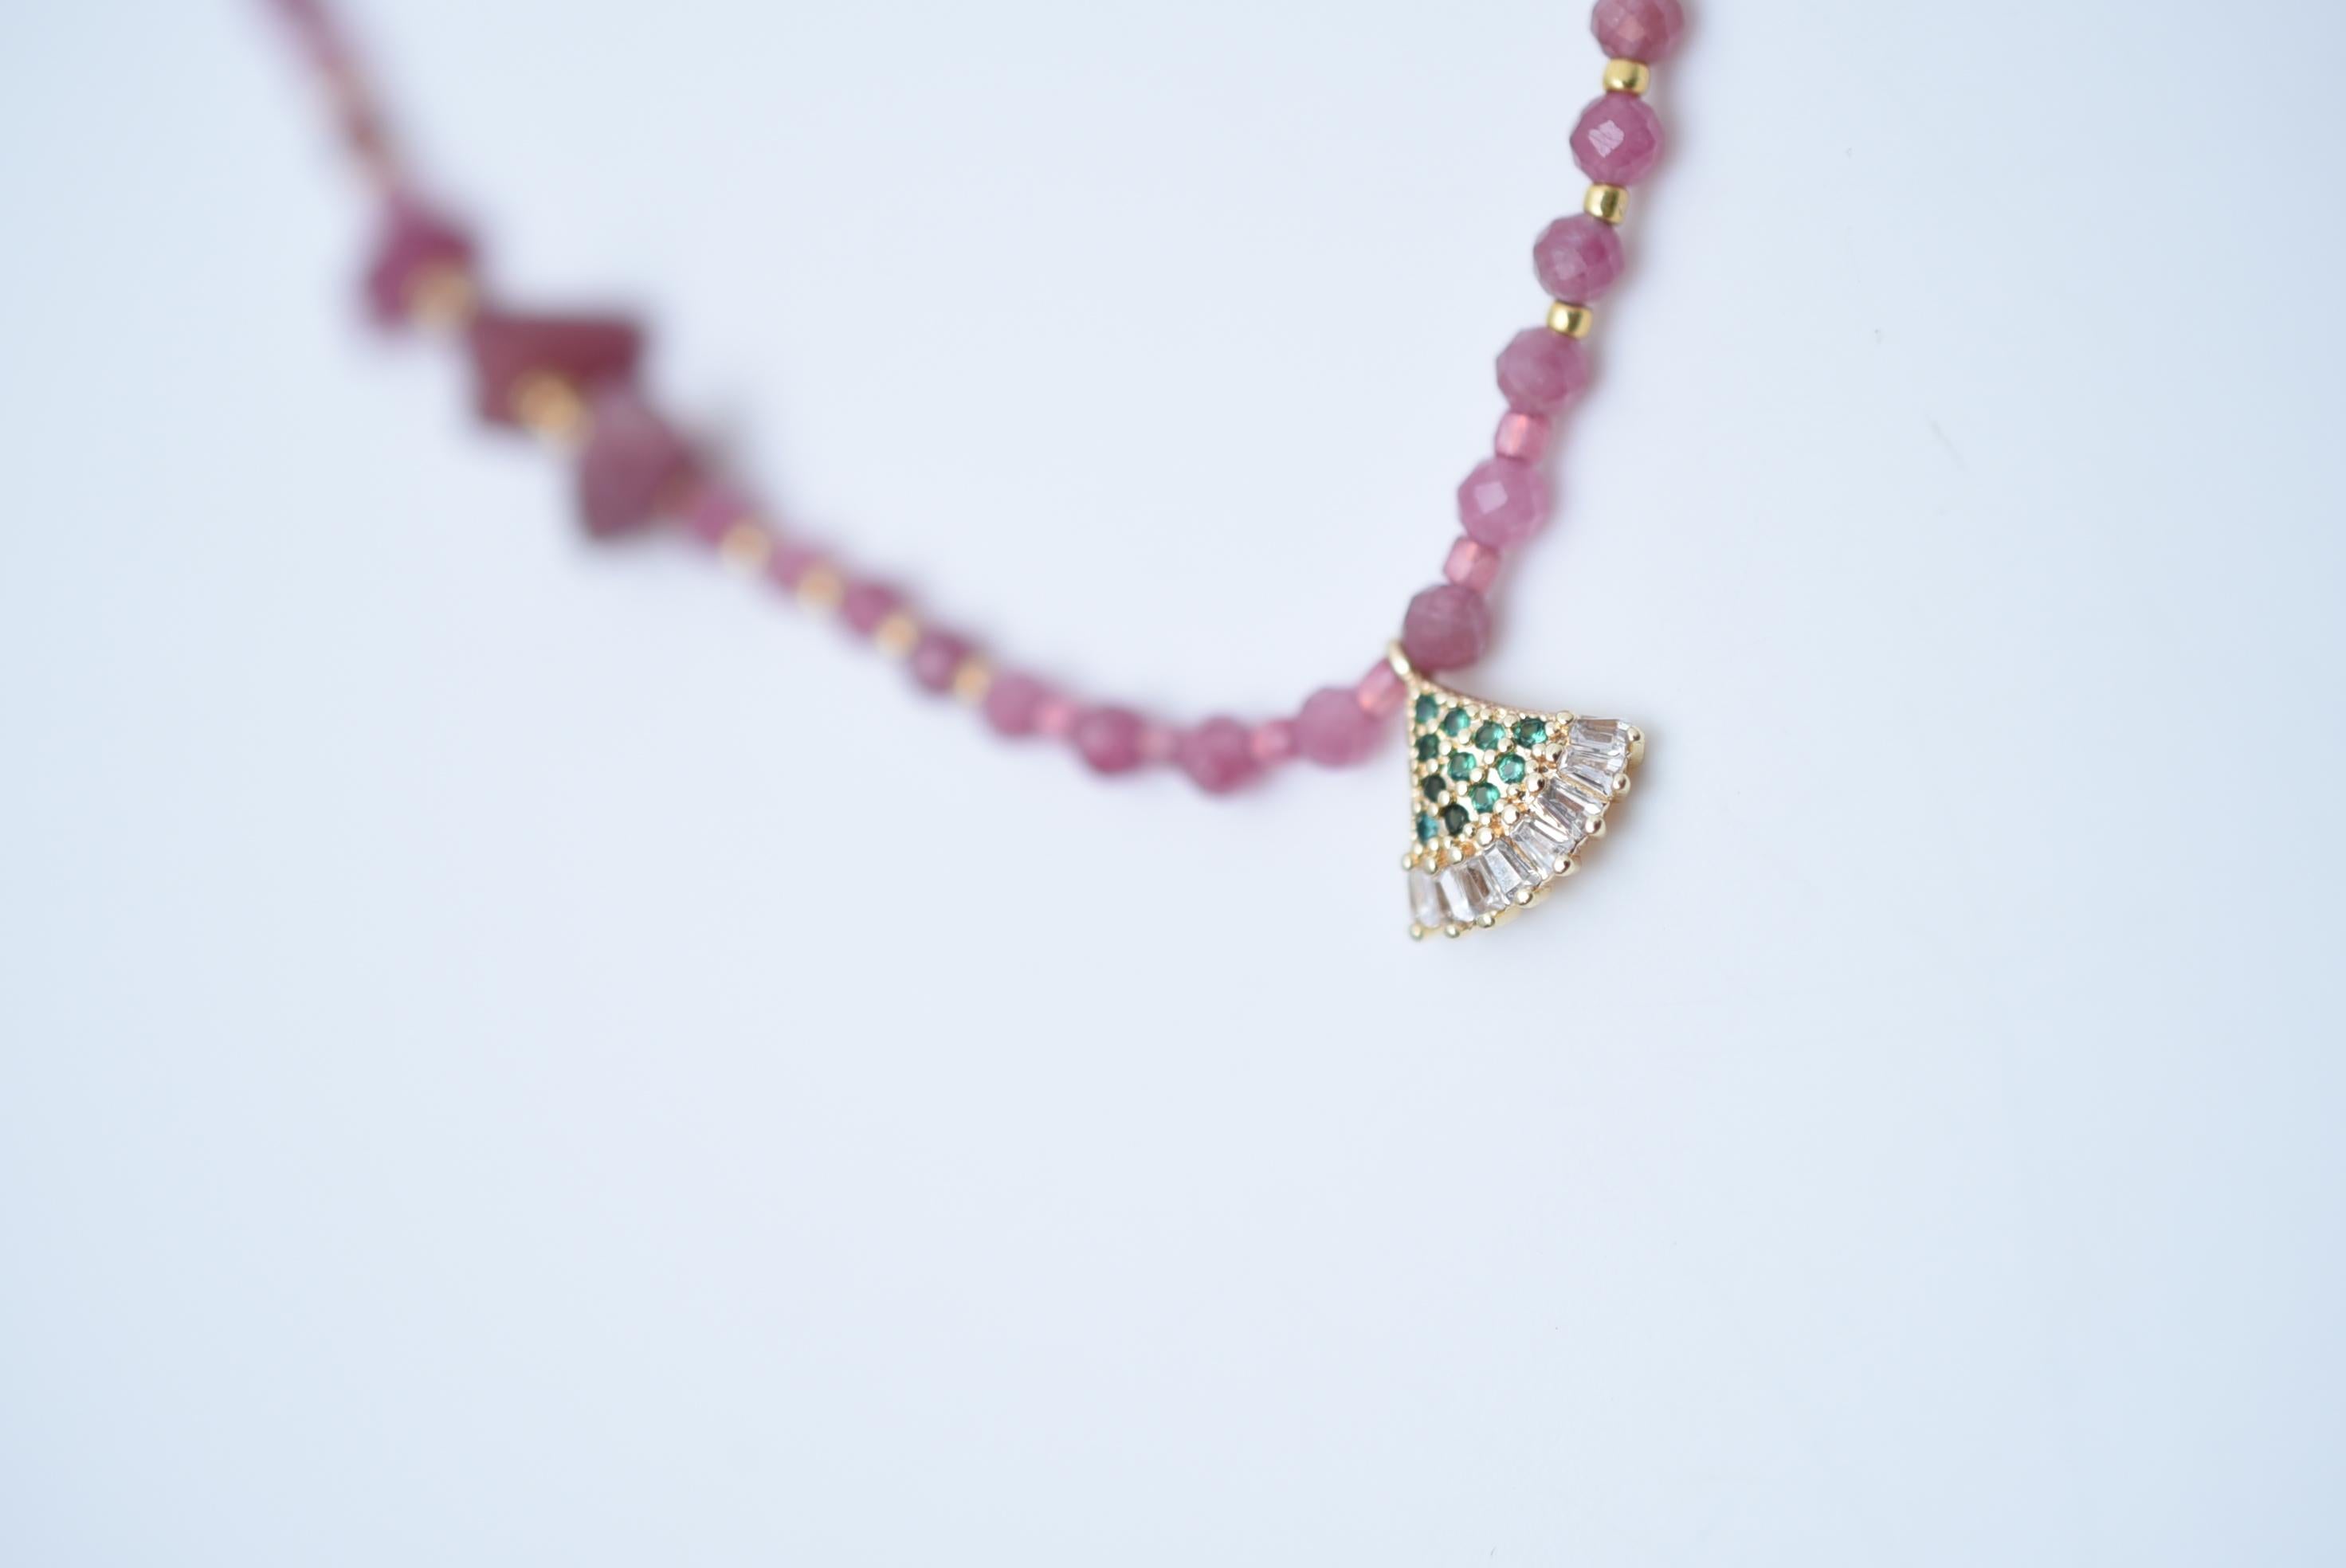 material:Brass, pink tourmaline, glass beads, magnet
size:around 42cm


Necklace with plenty of pink tourmaline.
The pink colour is surprisingly easy to blend with the skin and can be enjoyed as an accent even by those who don't normally wear much